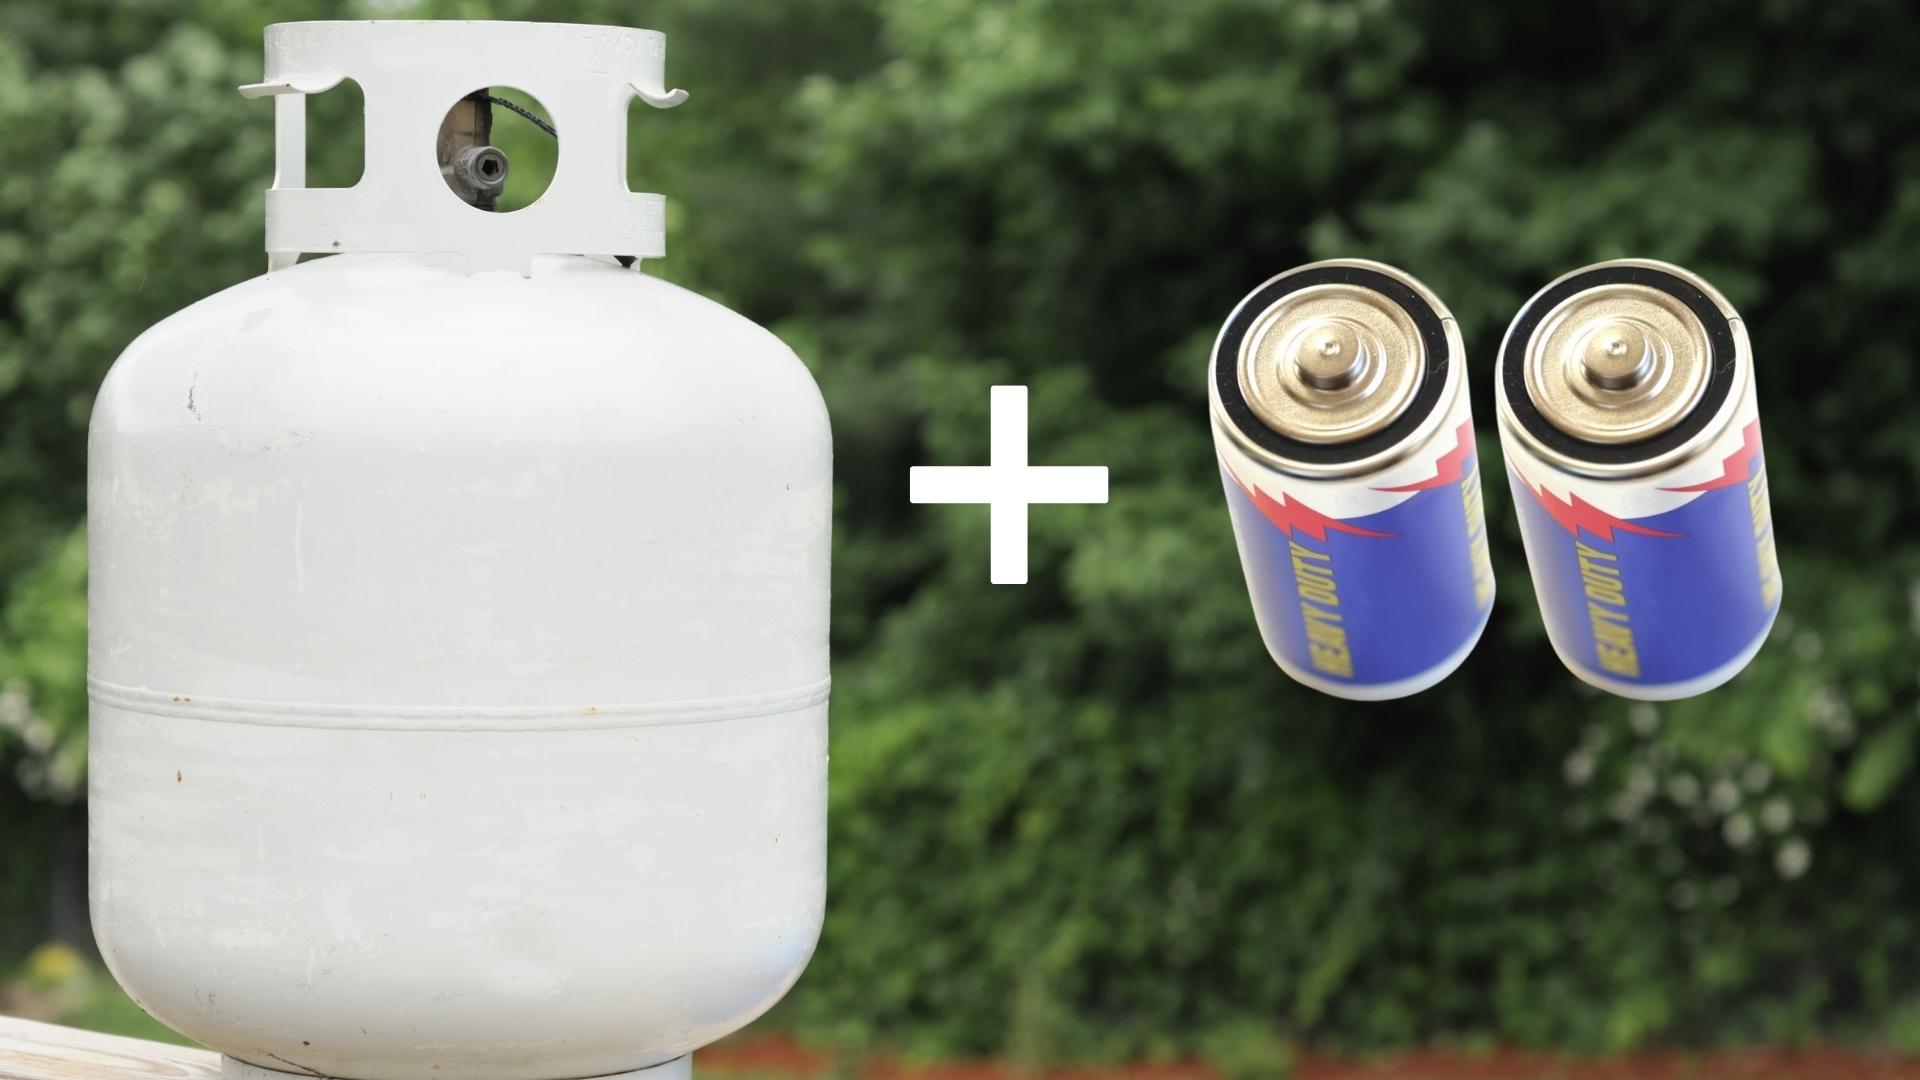 Photo illustration showing a propane tank and two D-cell batteries